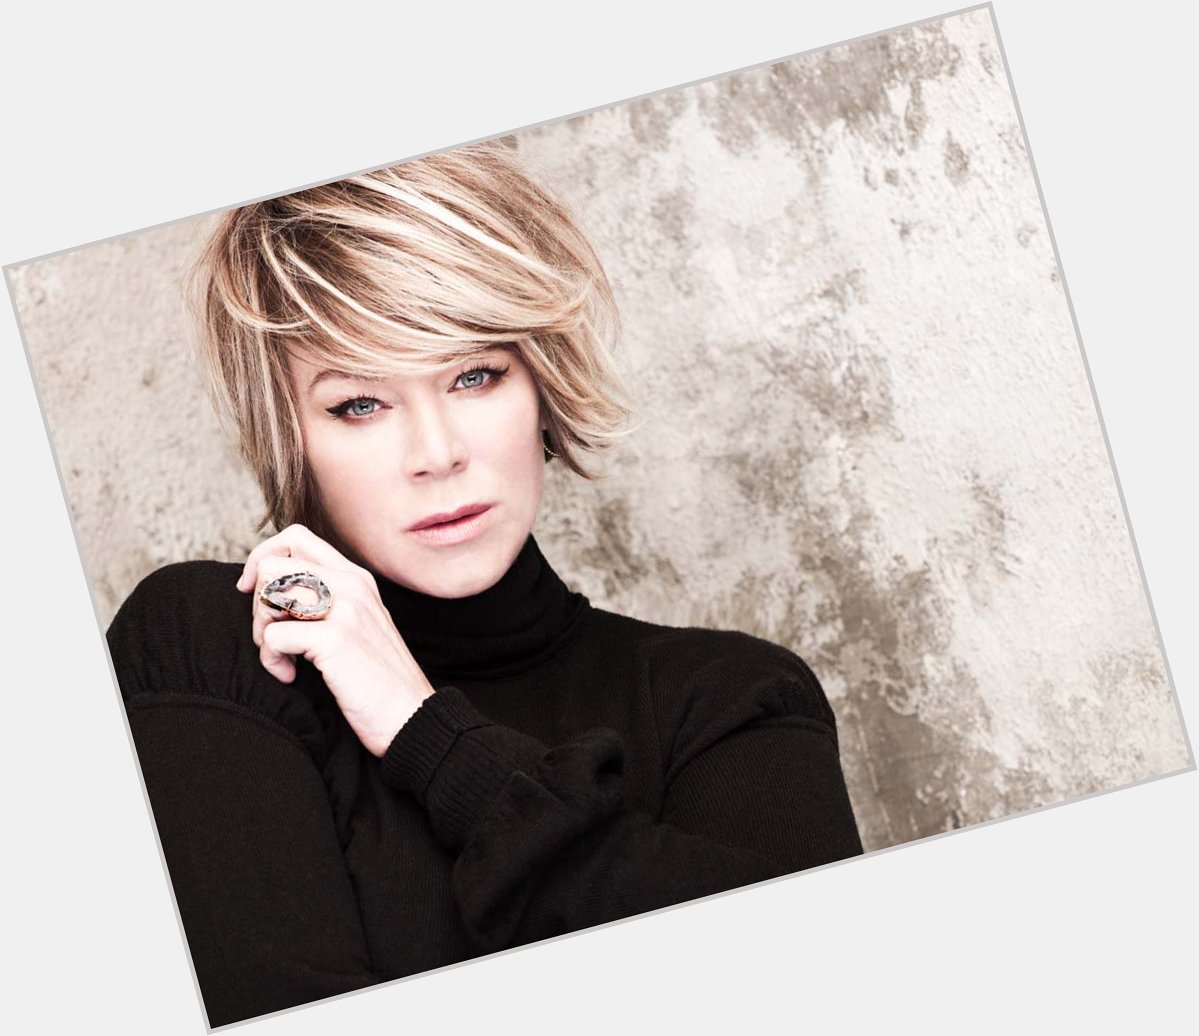  ON WITH Wishes:
Mia Michaels A Happy Birthday! 